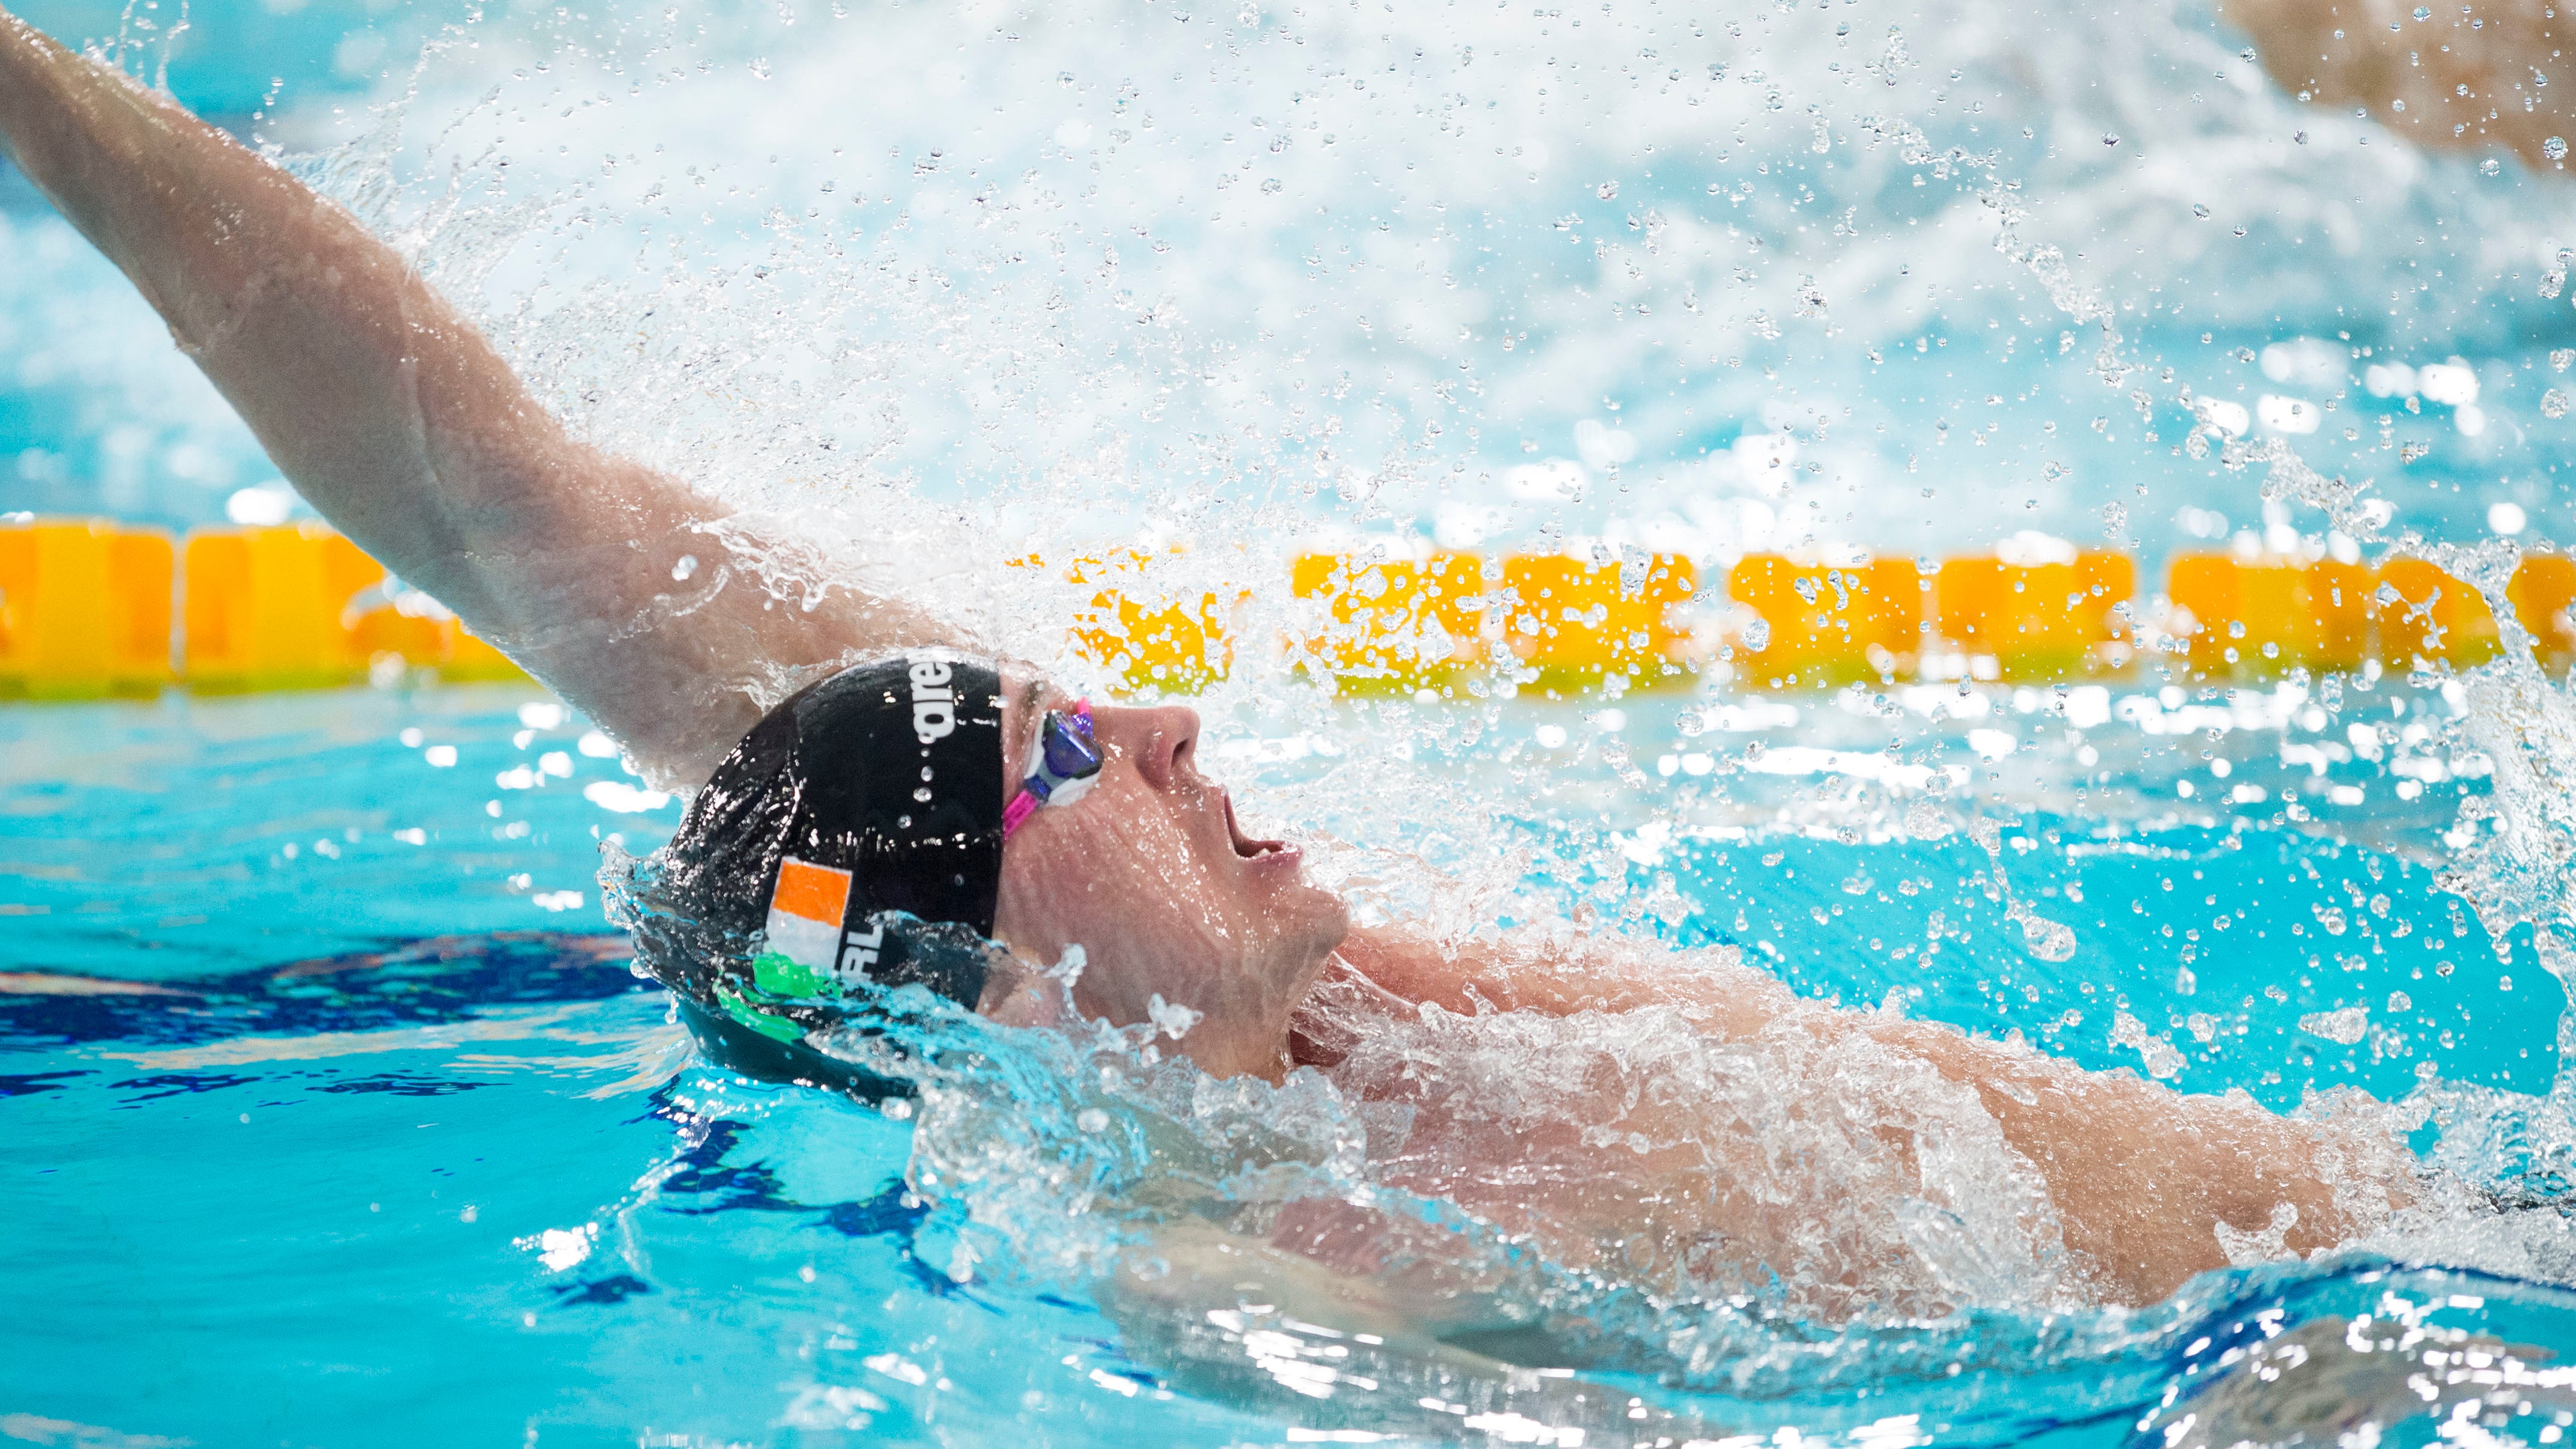 Ireland's Shane Ryan on his way to winning his heat in the Men's 100m Backstroke during the European Short Course Swimming Championships at Tollcross International Swimming Centre, Glasgow.